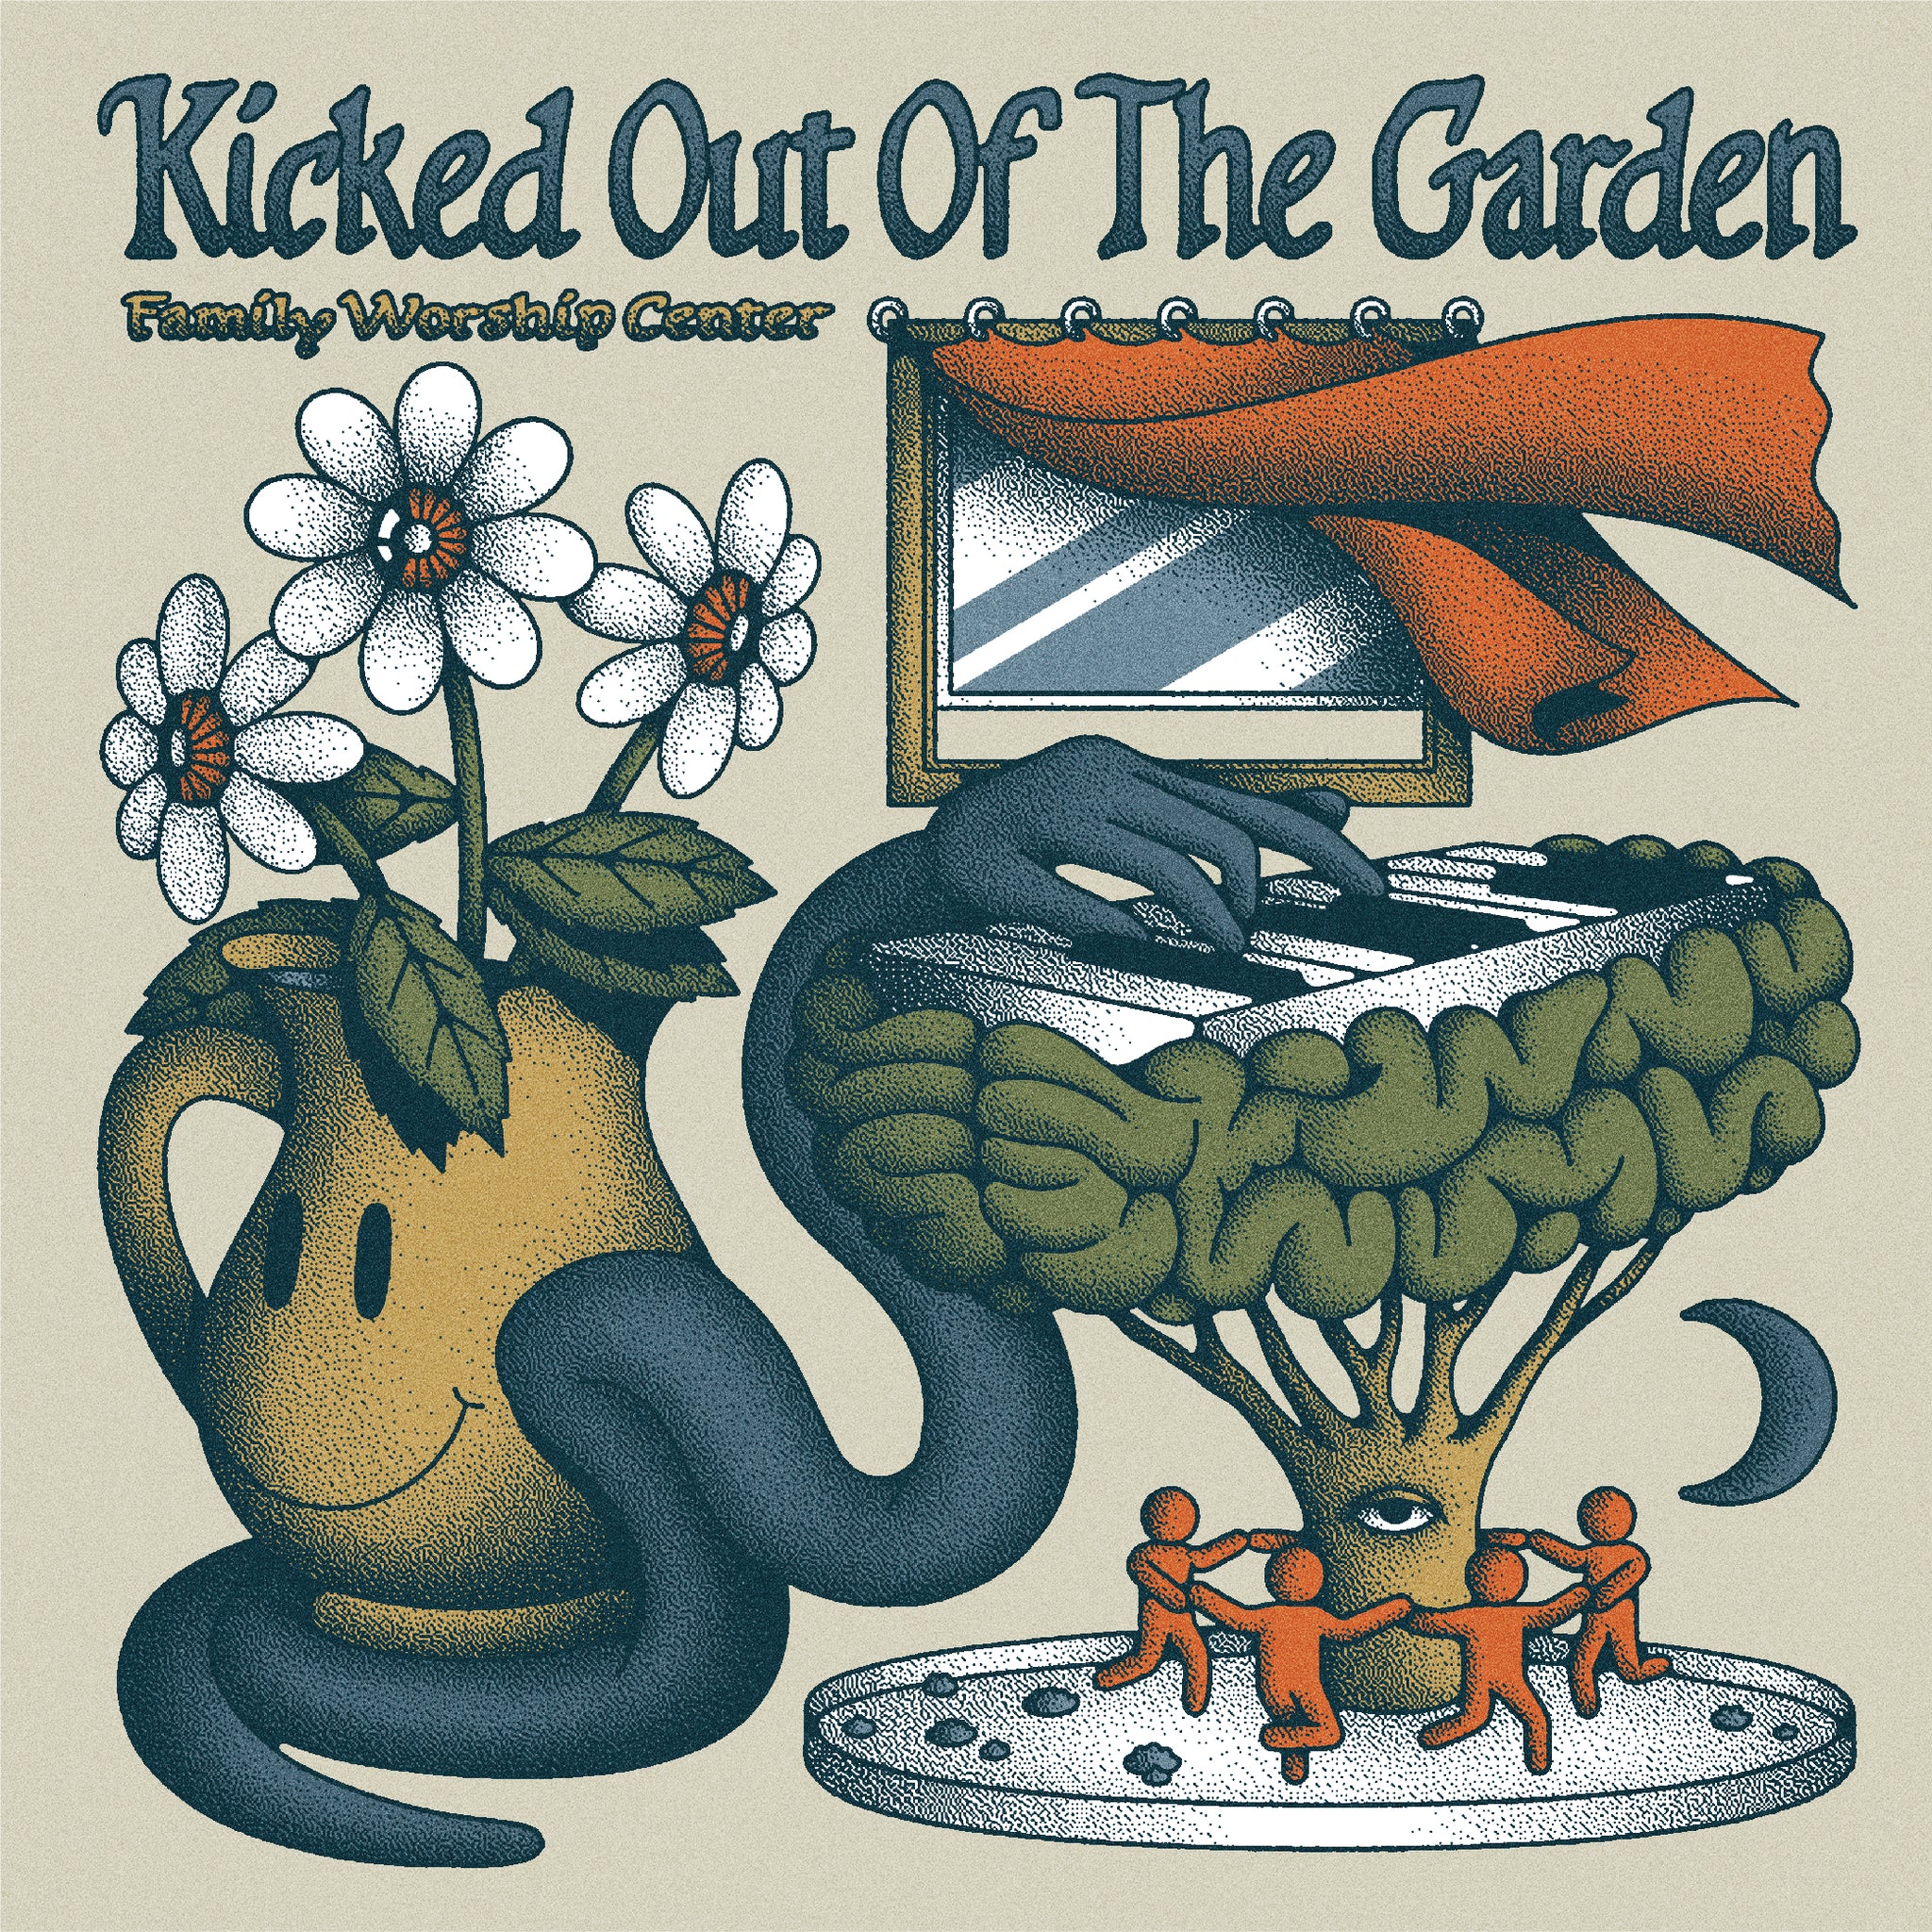 Family Worship Center Kicked Out Of The Garden album cover